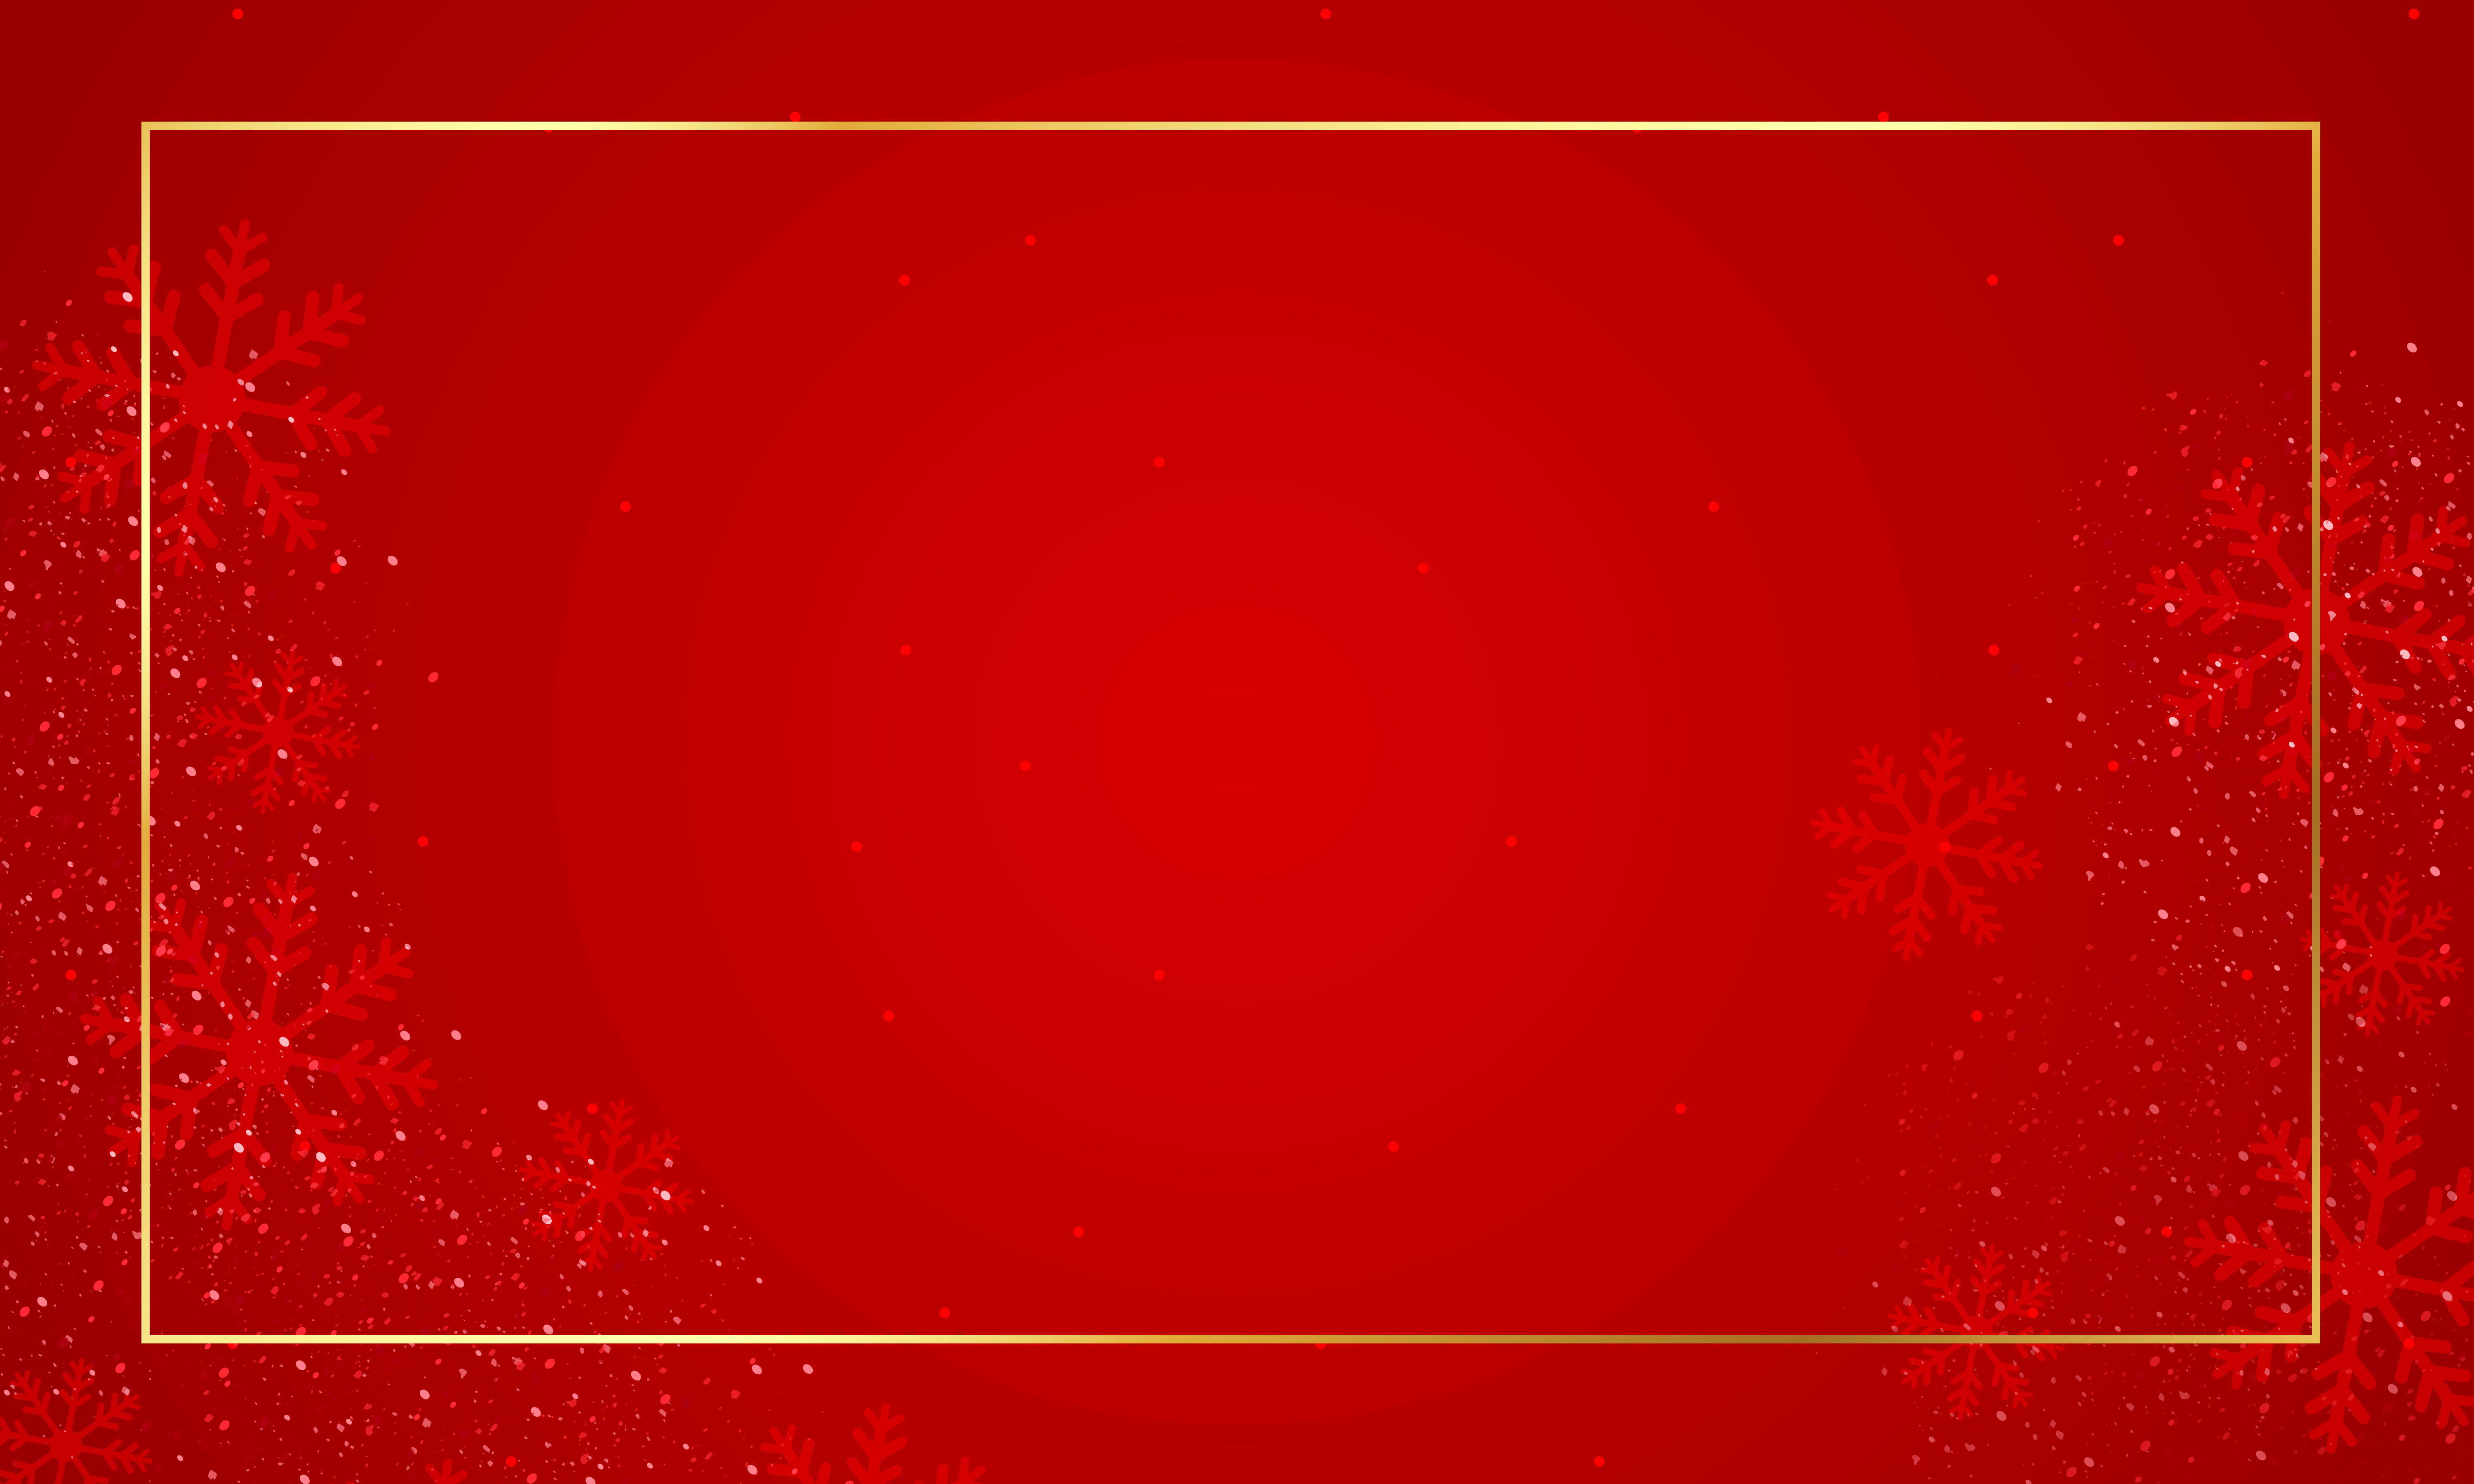 Red Snowflake Art, Icons, and Graphics for Download